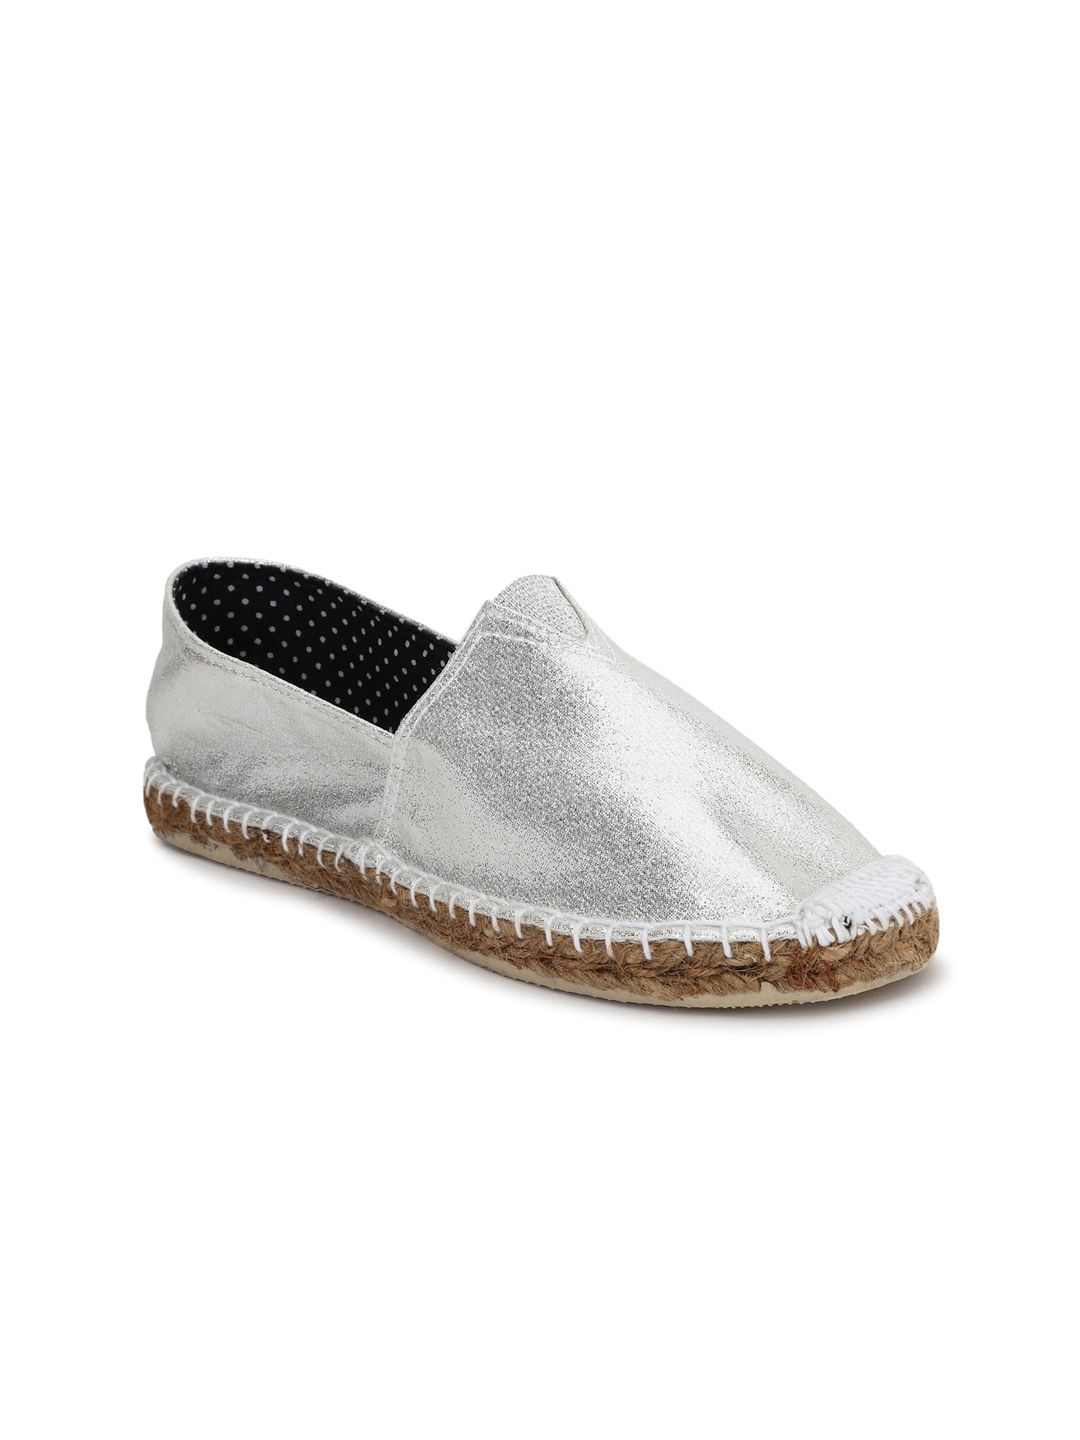 FOREVER 21 Women Silver-Toned PU Espadrilles Price in India